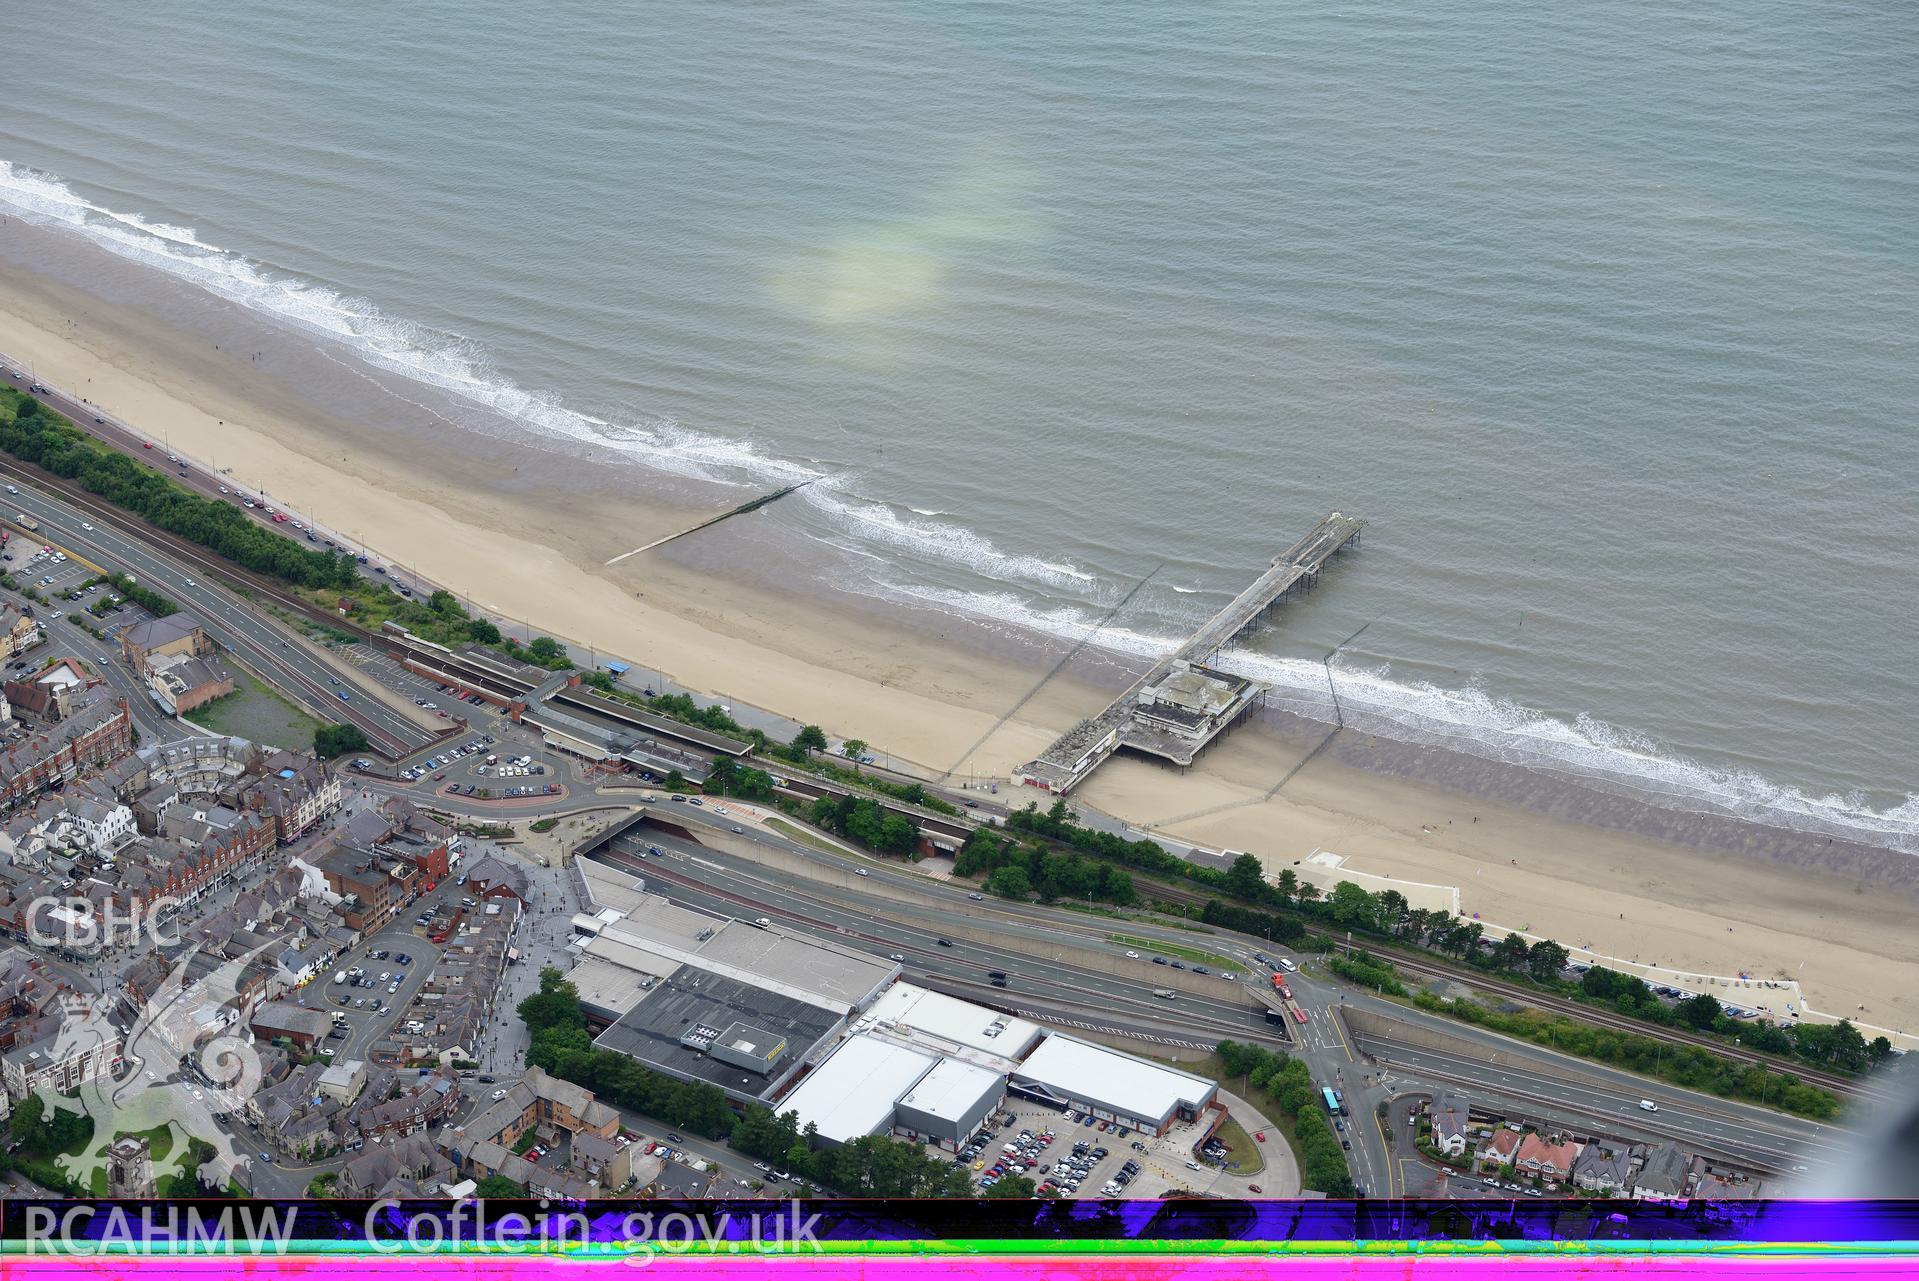 Victoria Pier and Pavilion, Railway Station and St. Paul's Church, Colwyn Bay. Oblique aerial photograph taken during the Royal Commission's programme of archaeological aerial reconnaissance by Toby Driver on 30th July 2015.